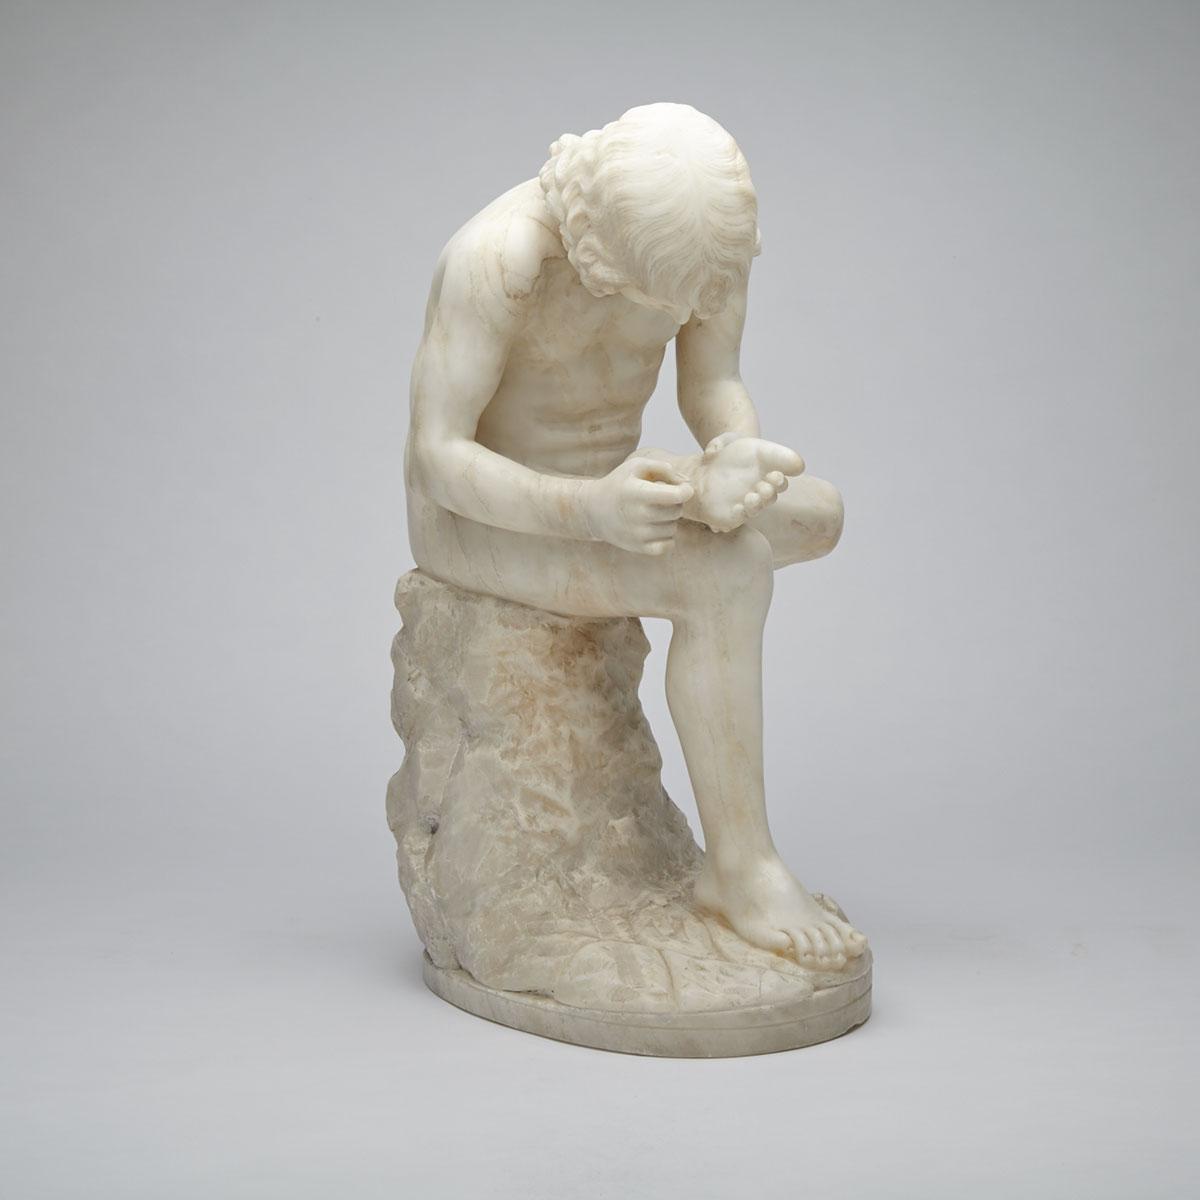 Italian Carrara Marble Model of the Spinario, After the Antique, 19th century